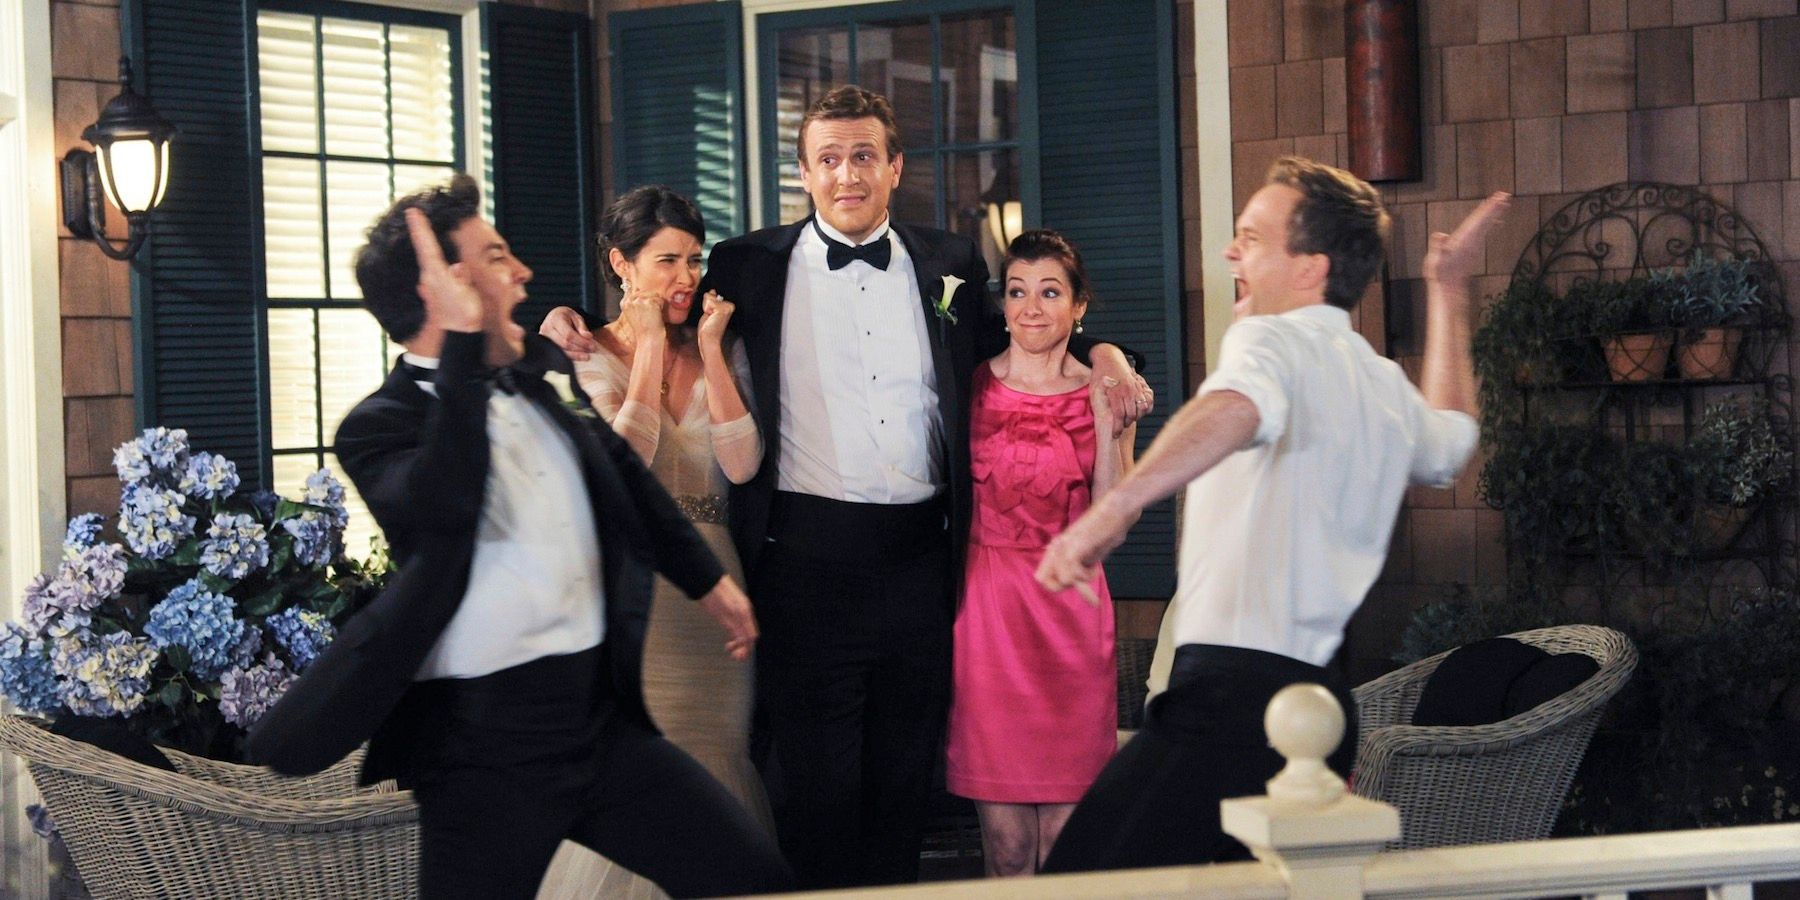 What We Learned From 'How I Met Your Mother